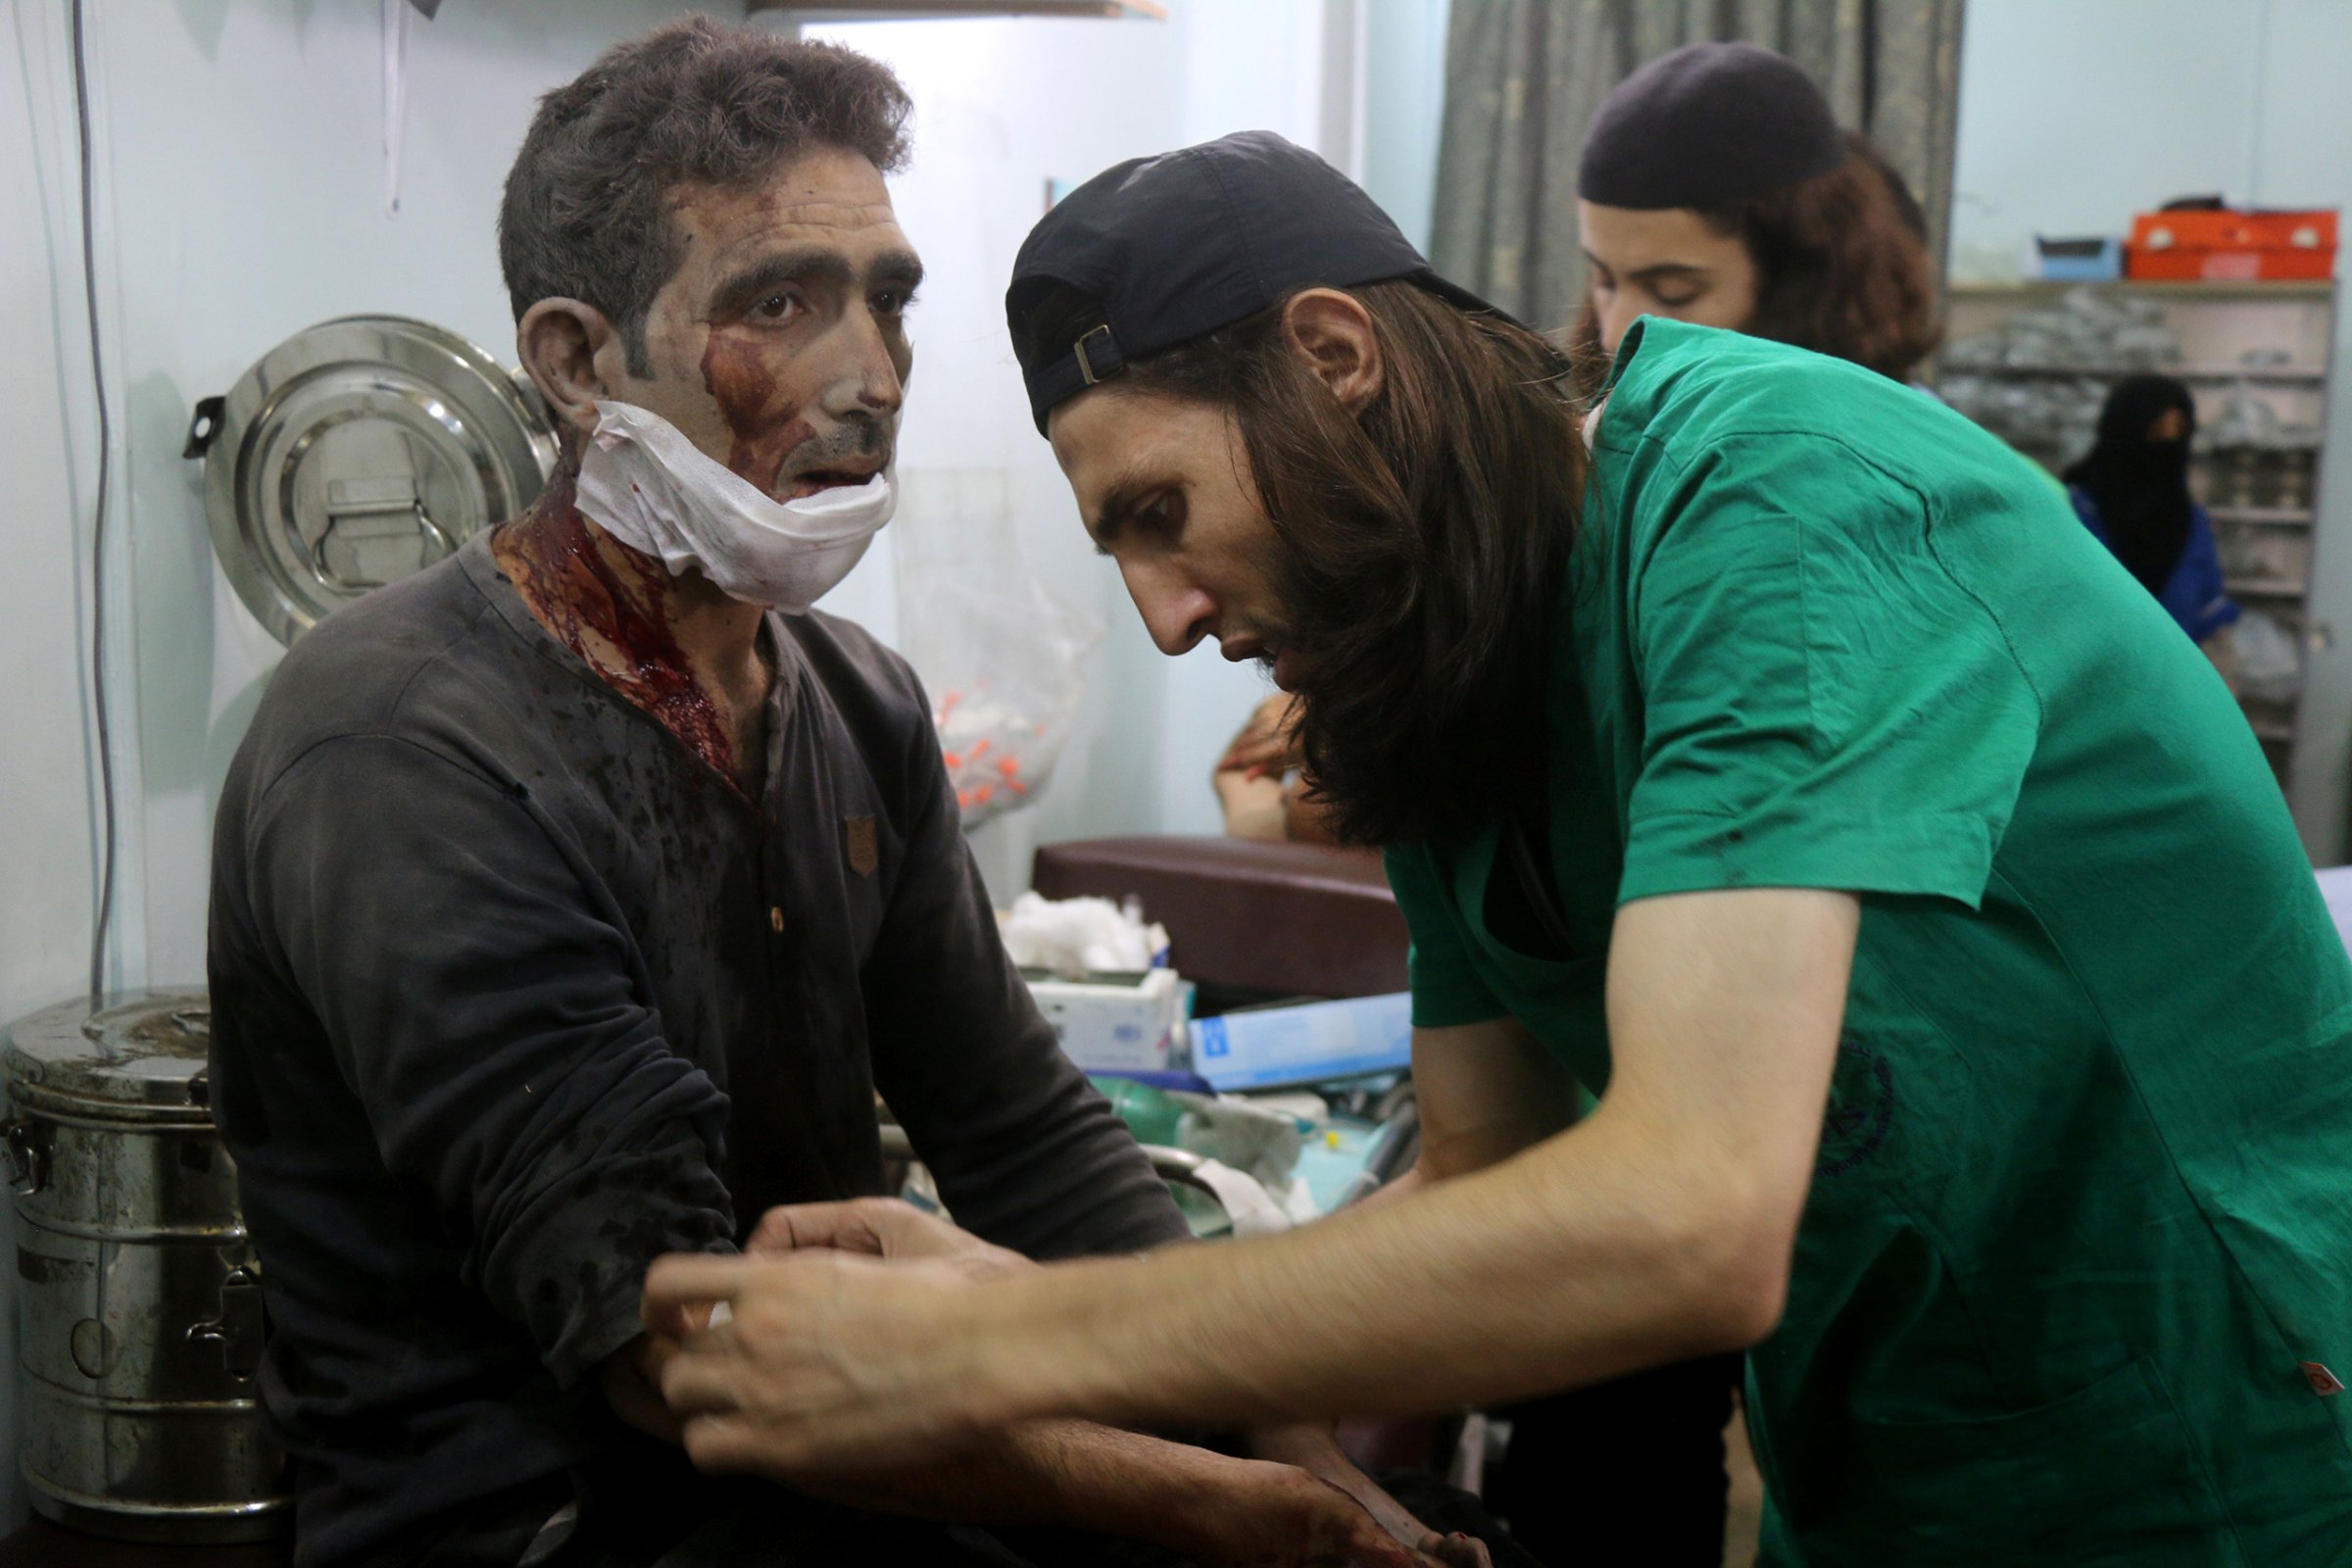 Syrian medics treat a man at a makeshift hospital in the Tariq al-Bab neighborhood of Aleppo after he was wounded during reported air raids that targeted rebel-held areas on Aug. 16, 2016.